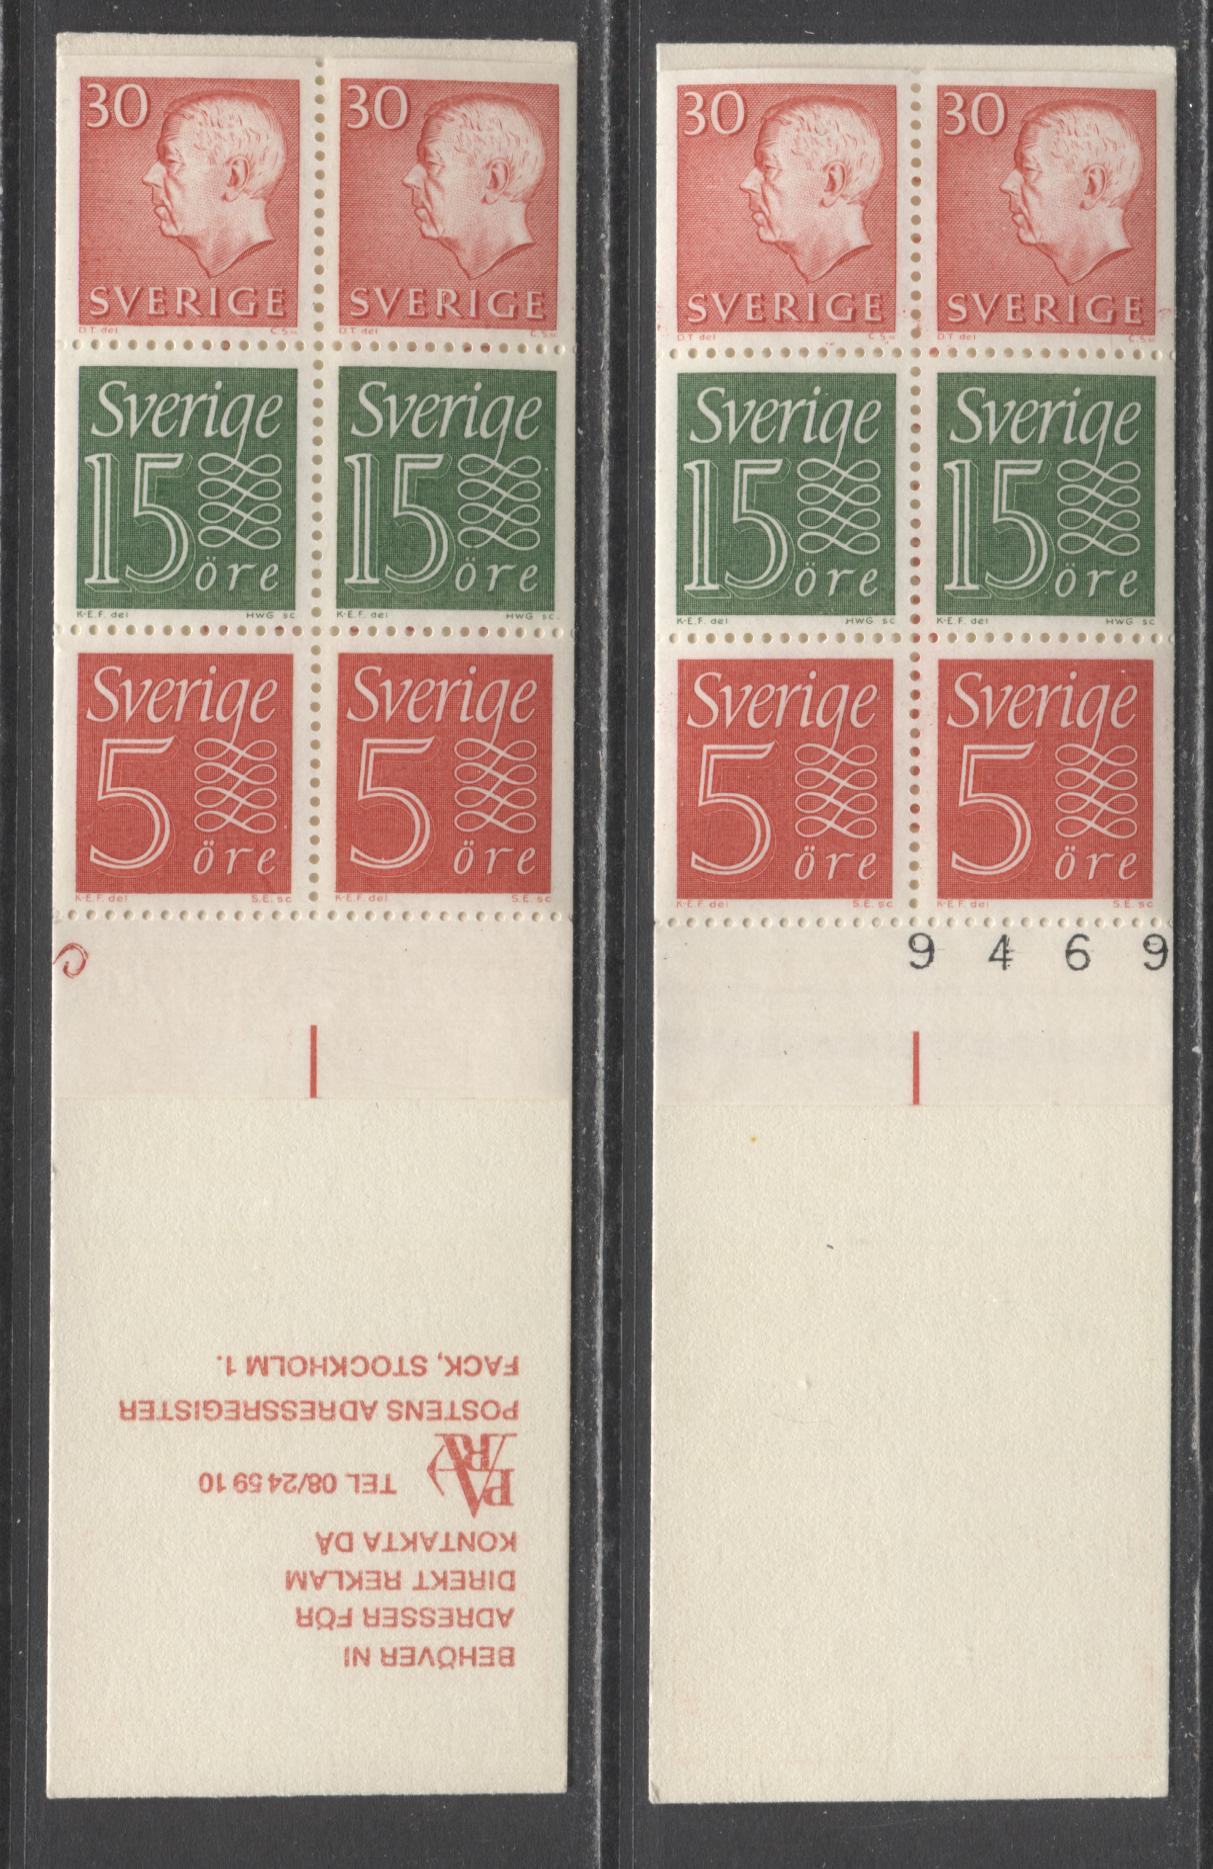 Lot 181 Sweden SC#668a (Facit #HA15B1O)/668a (Facit #HA15AO) 1966 Re-Engraved King Gustav VI Adolf Definitive Issue, Two Different Covers, Inverted Panes, And Different Tab Markings, 2 VFNH Booklets of 6 (2 +2 +2),  Estimated Value $7